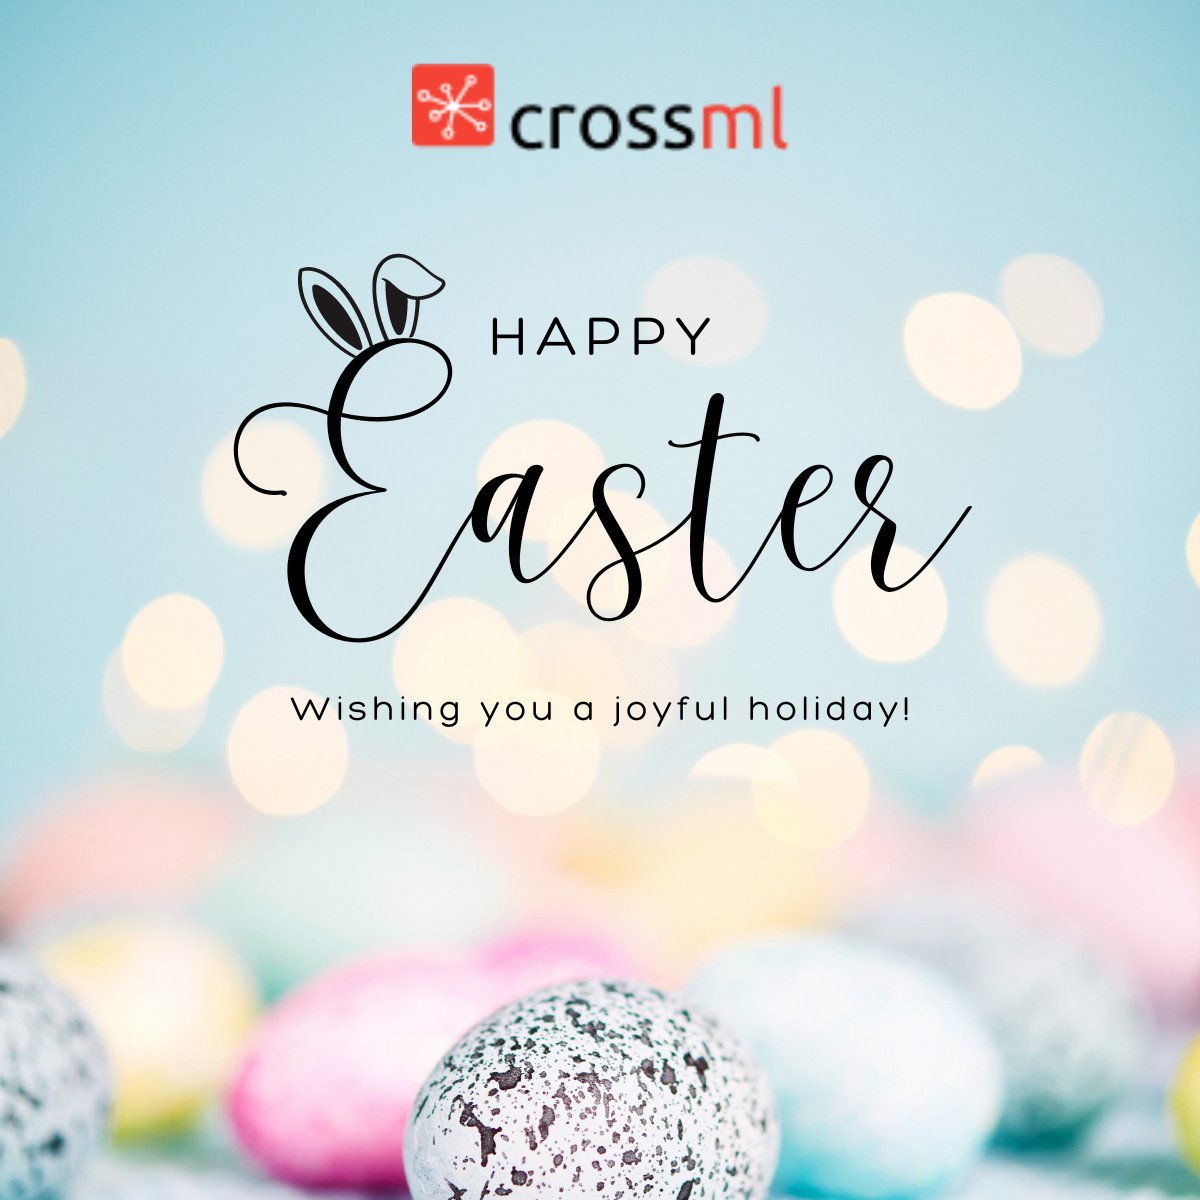 Happy Easter! May your day be as bright and beautiful as spring flowers in bloom. 🌸🐣

#easter2024 #happyeaster #crossml #EasterJoy #RenewalAndHope